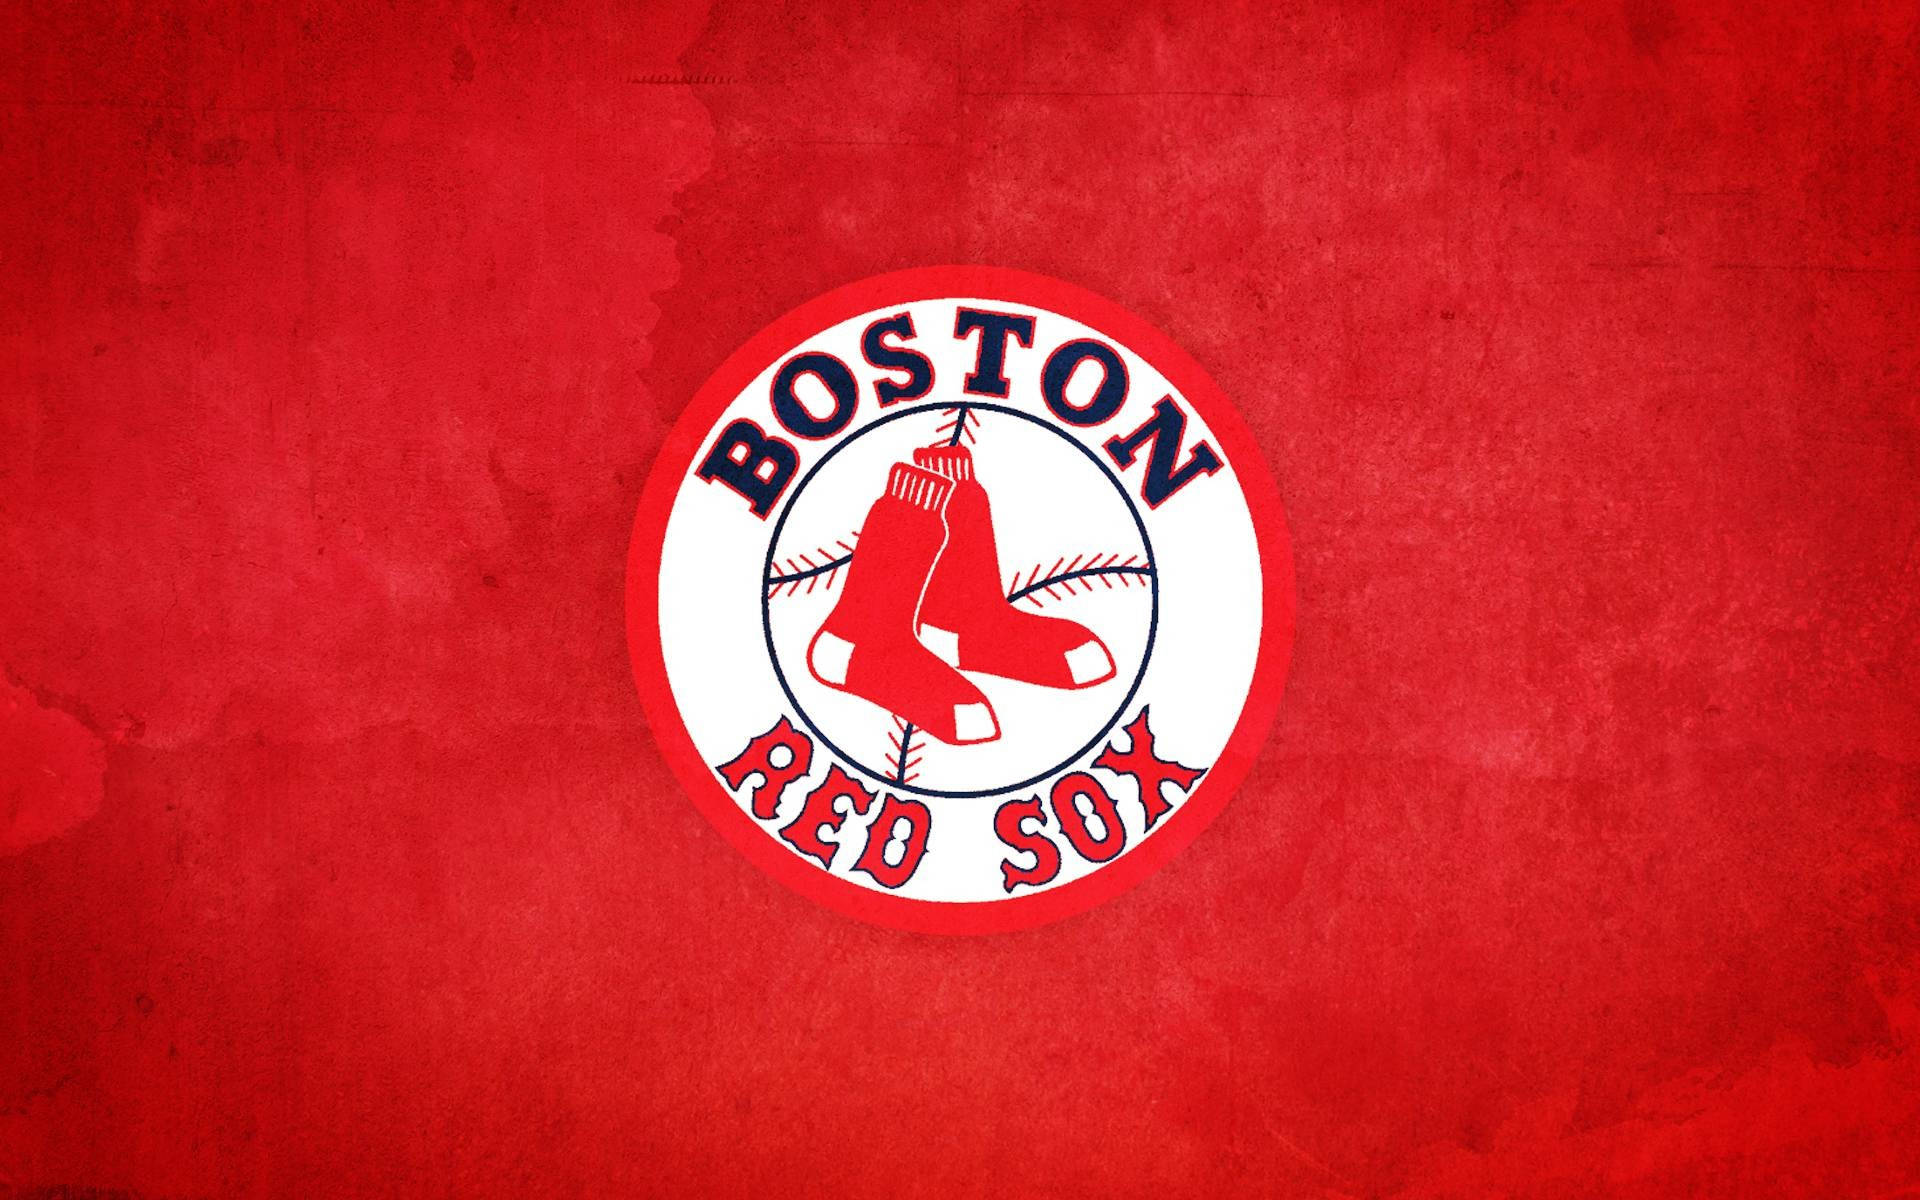 Logo Of The Boston Red Sox